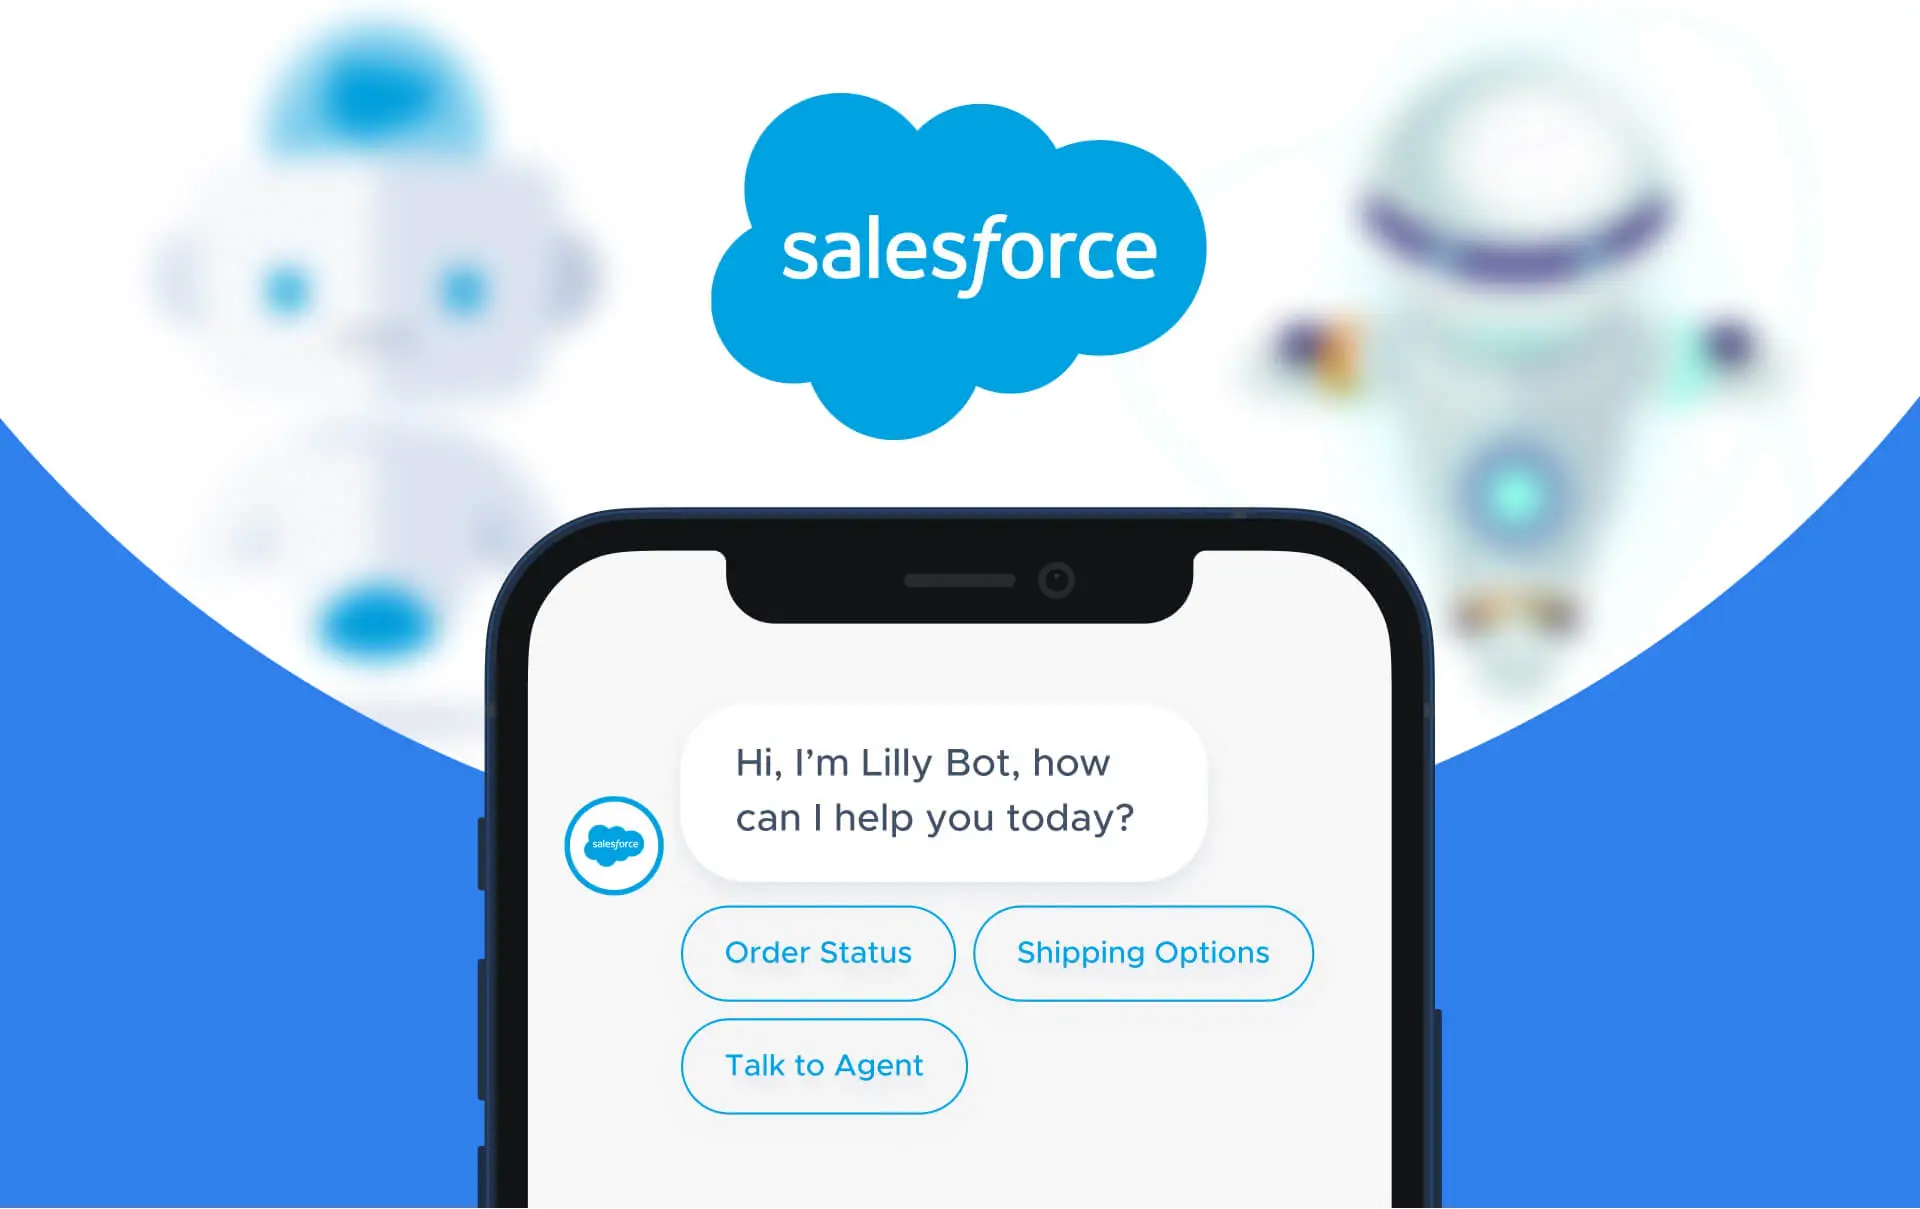 What are Salesforce Chatbots?